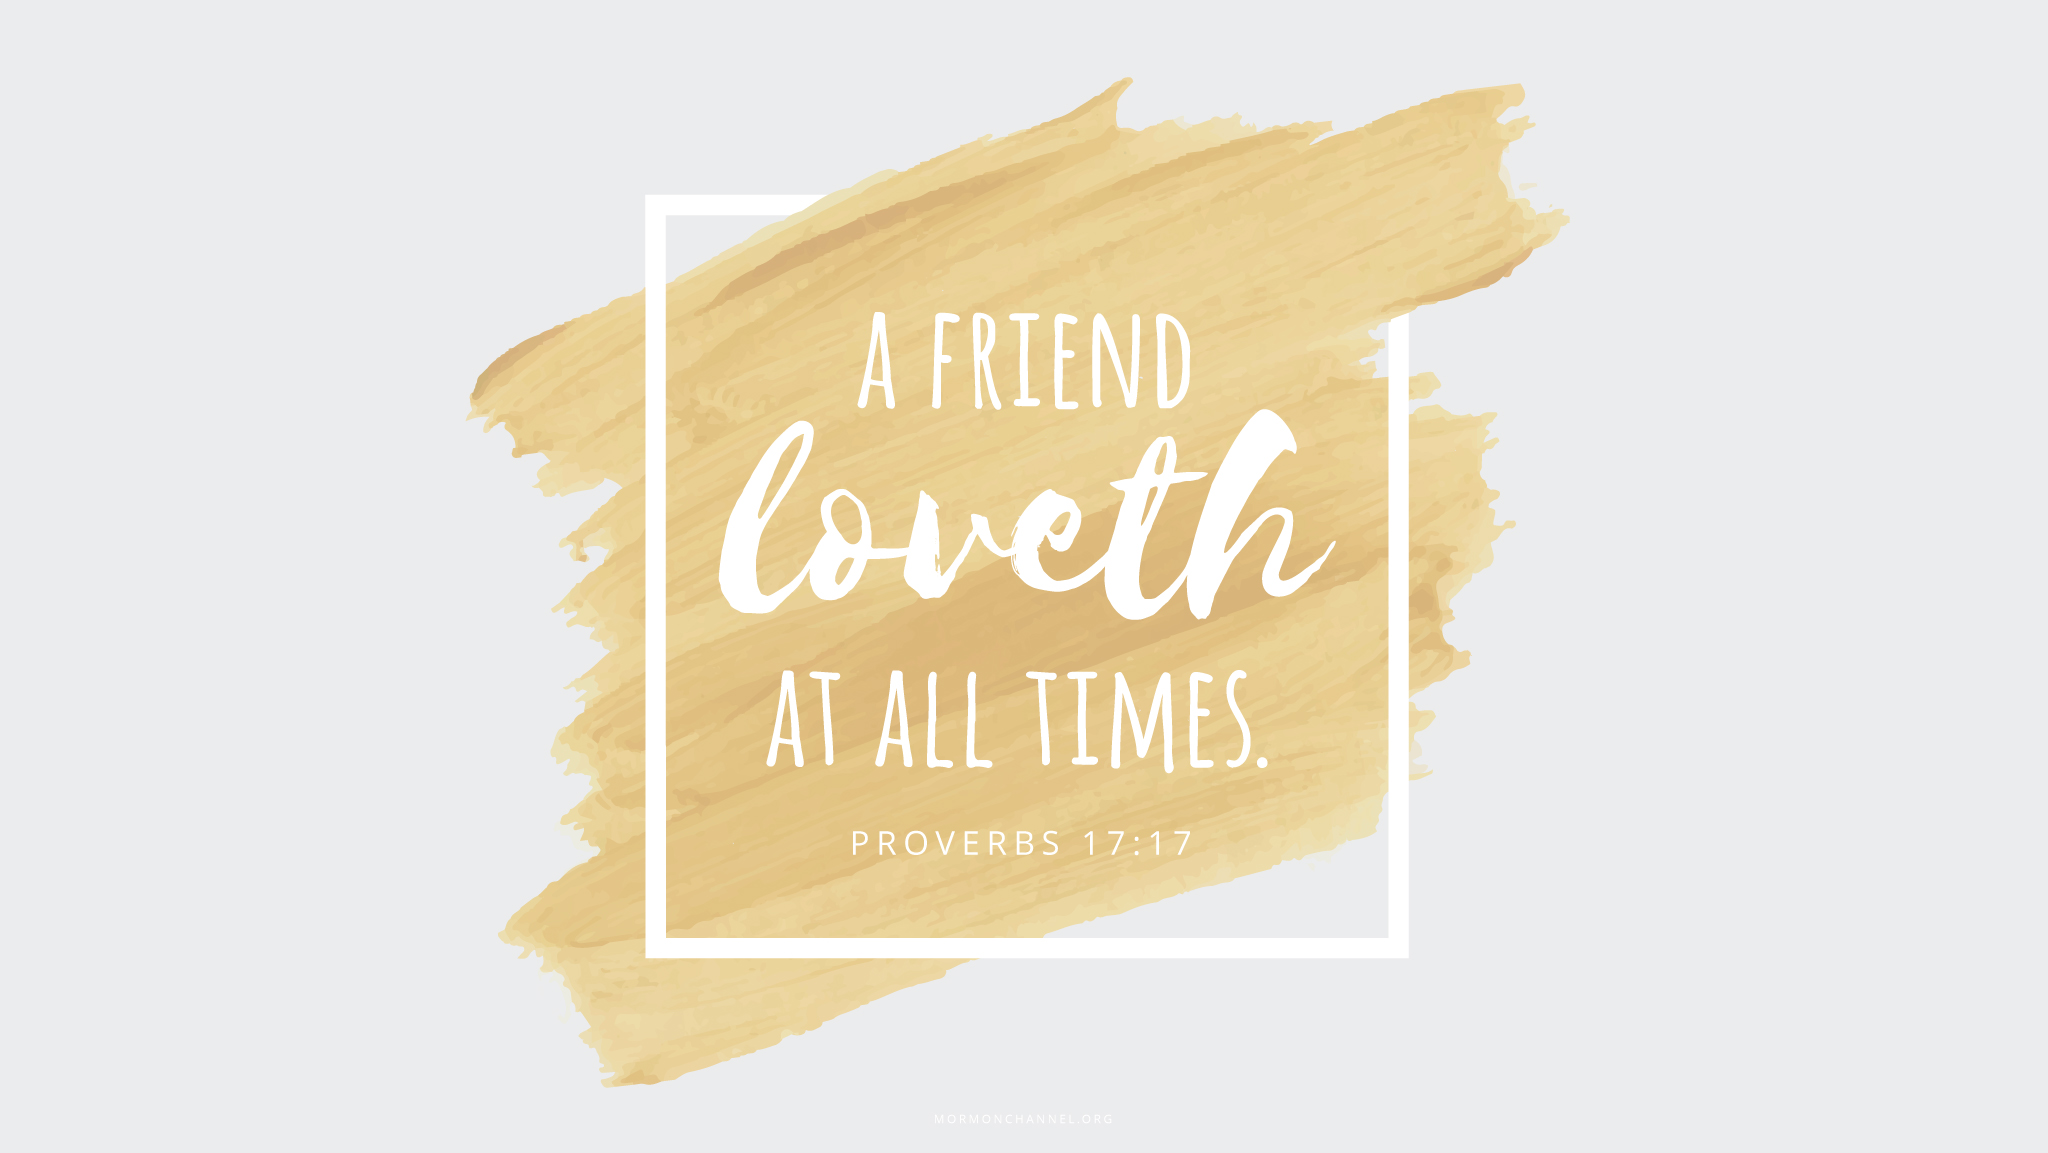 "A friend loveth at all times